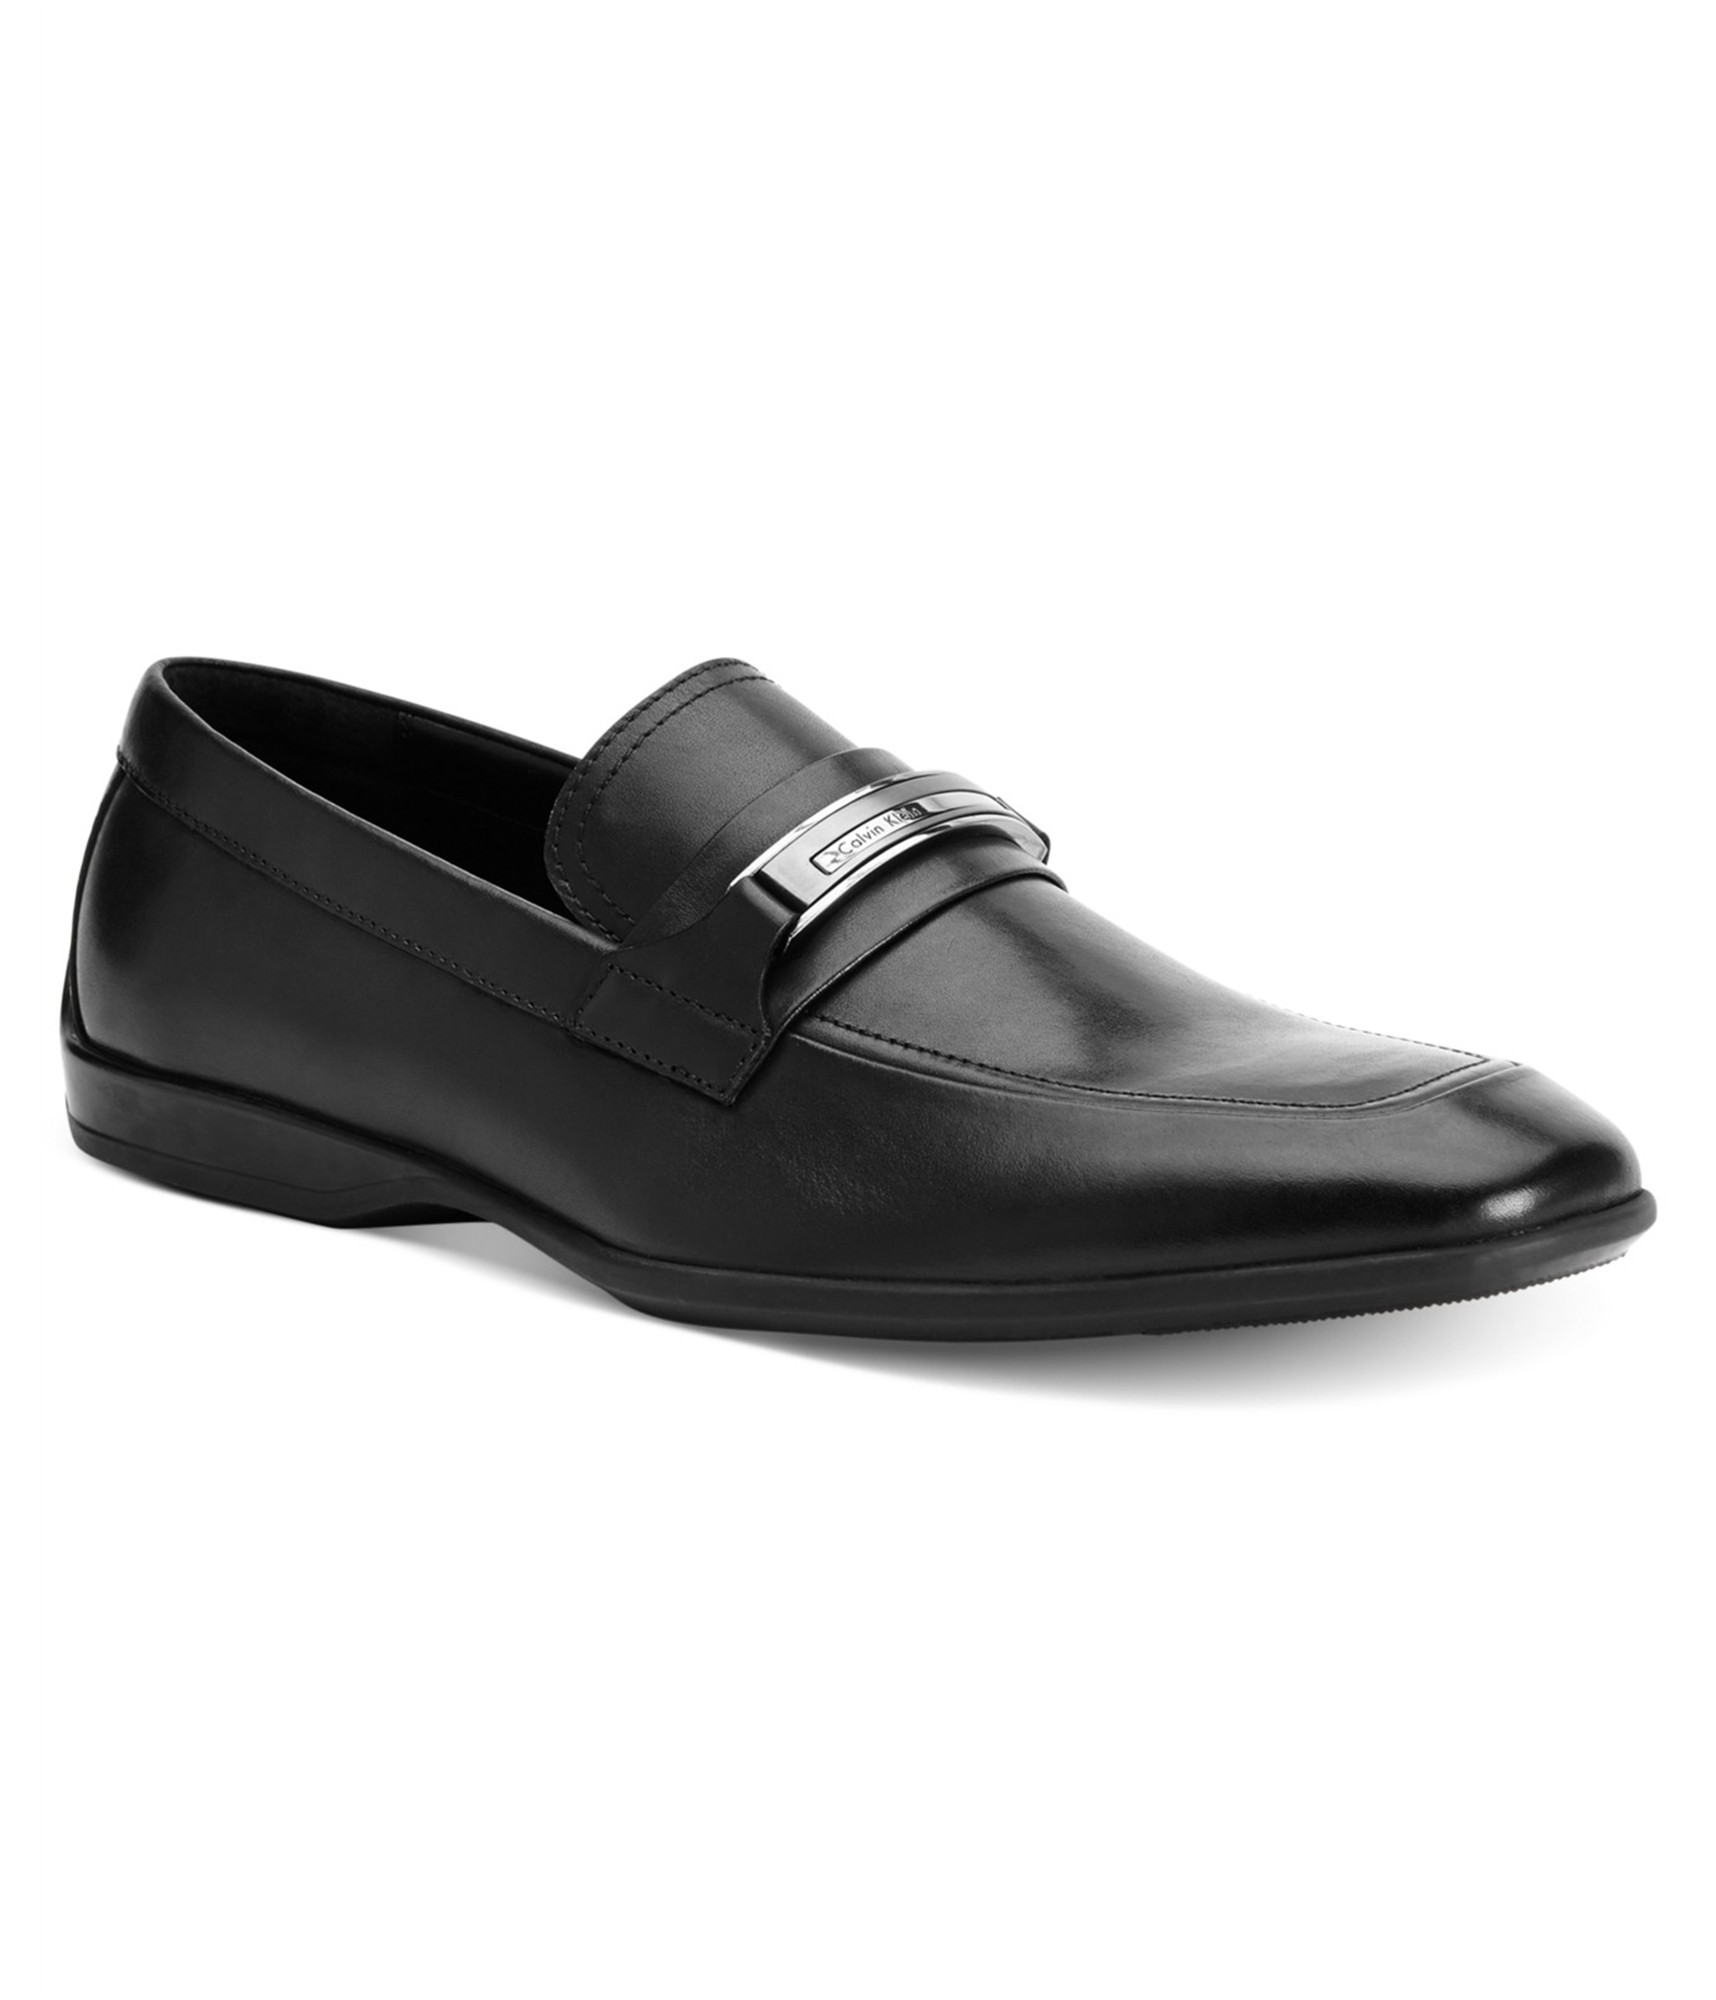 Buy a Calvin Klein Mens Vick Leather Bit Comfort Loafers | Tagsweekly